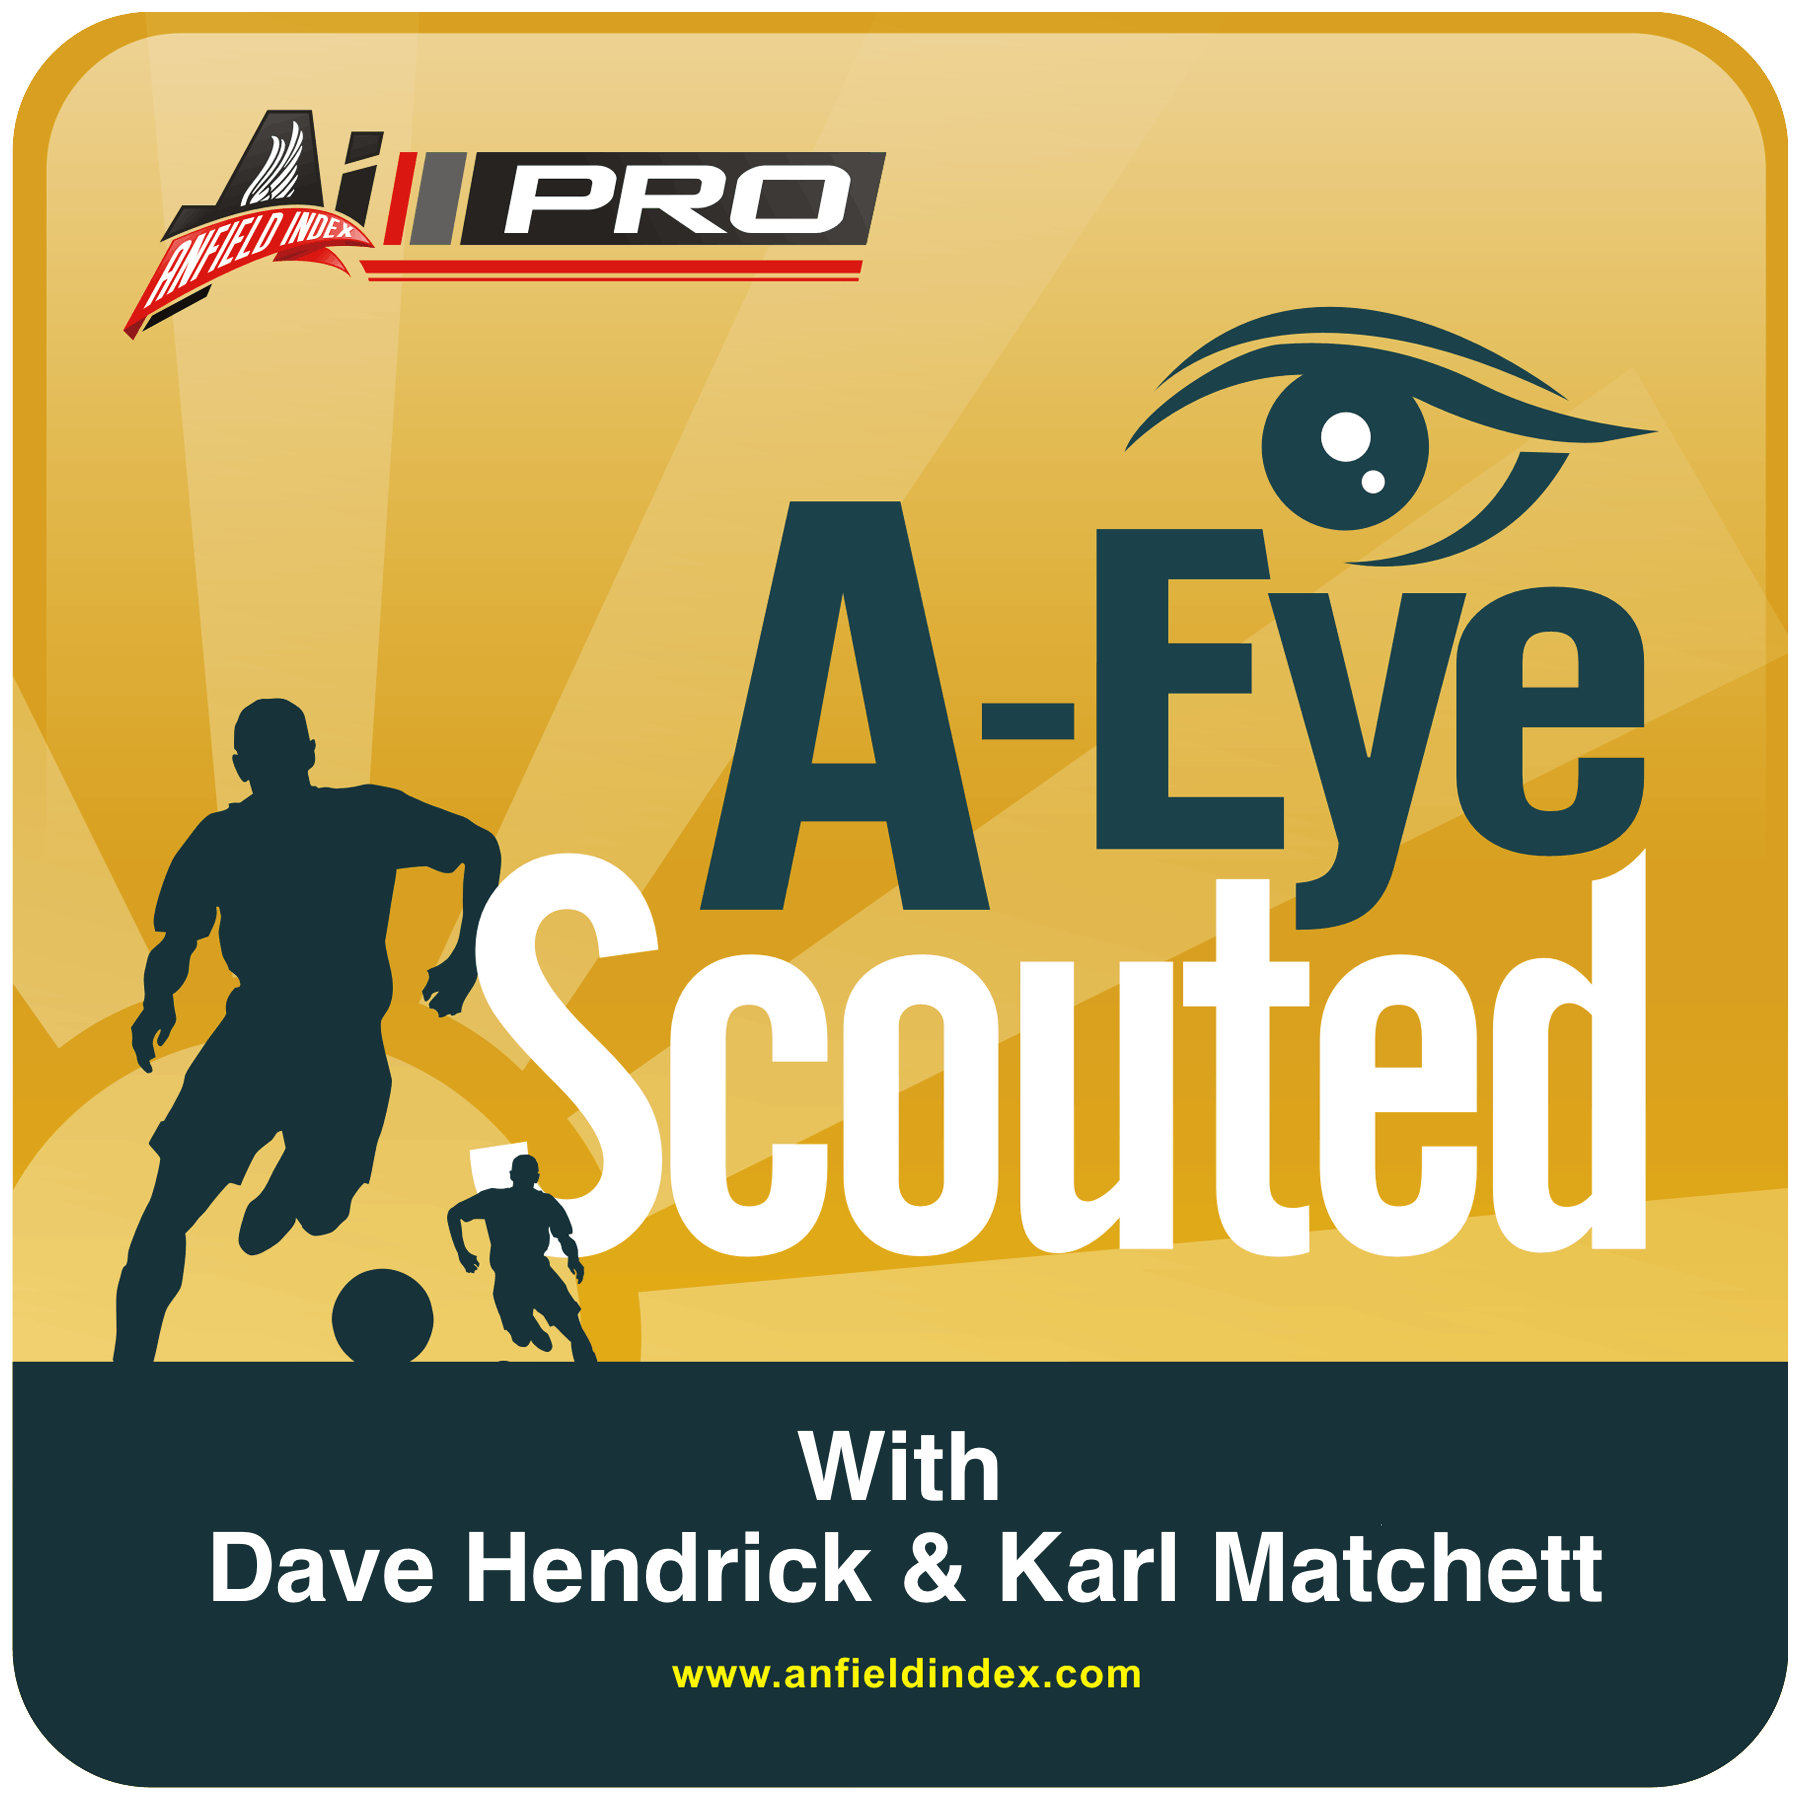 West Ham vs Liverpool - AEye Scouted